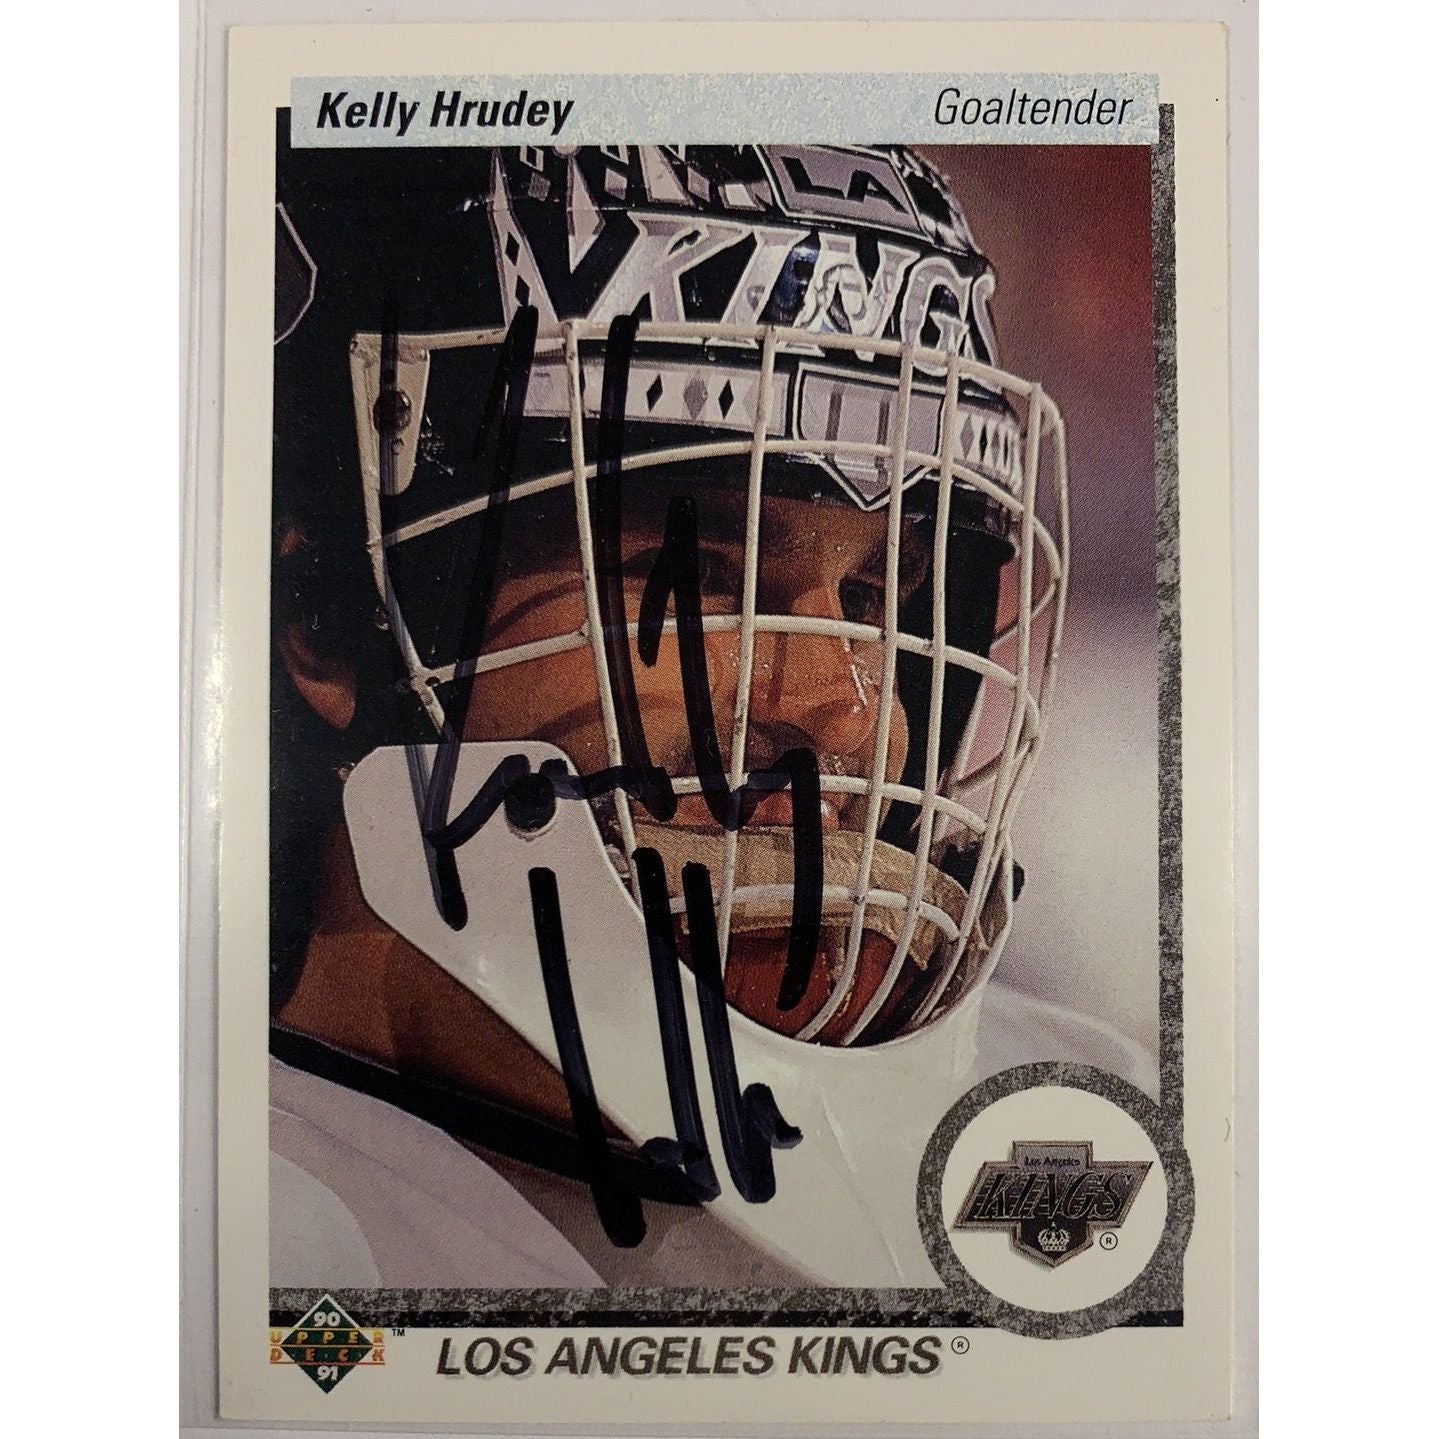  1990-91 Upper Deck Kelly Hrudey In Person Auto  Local Legends Cards & Collectibles